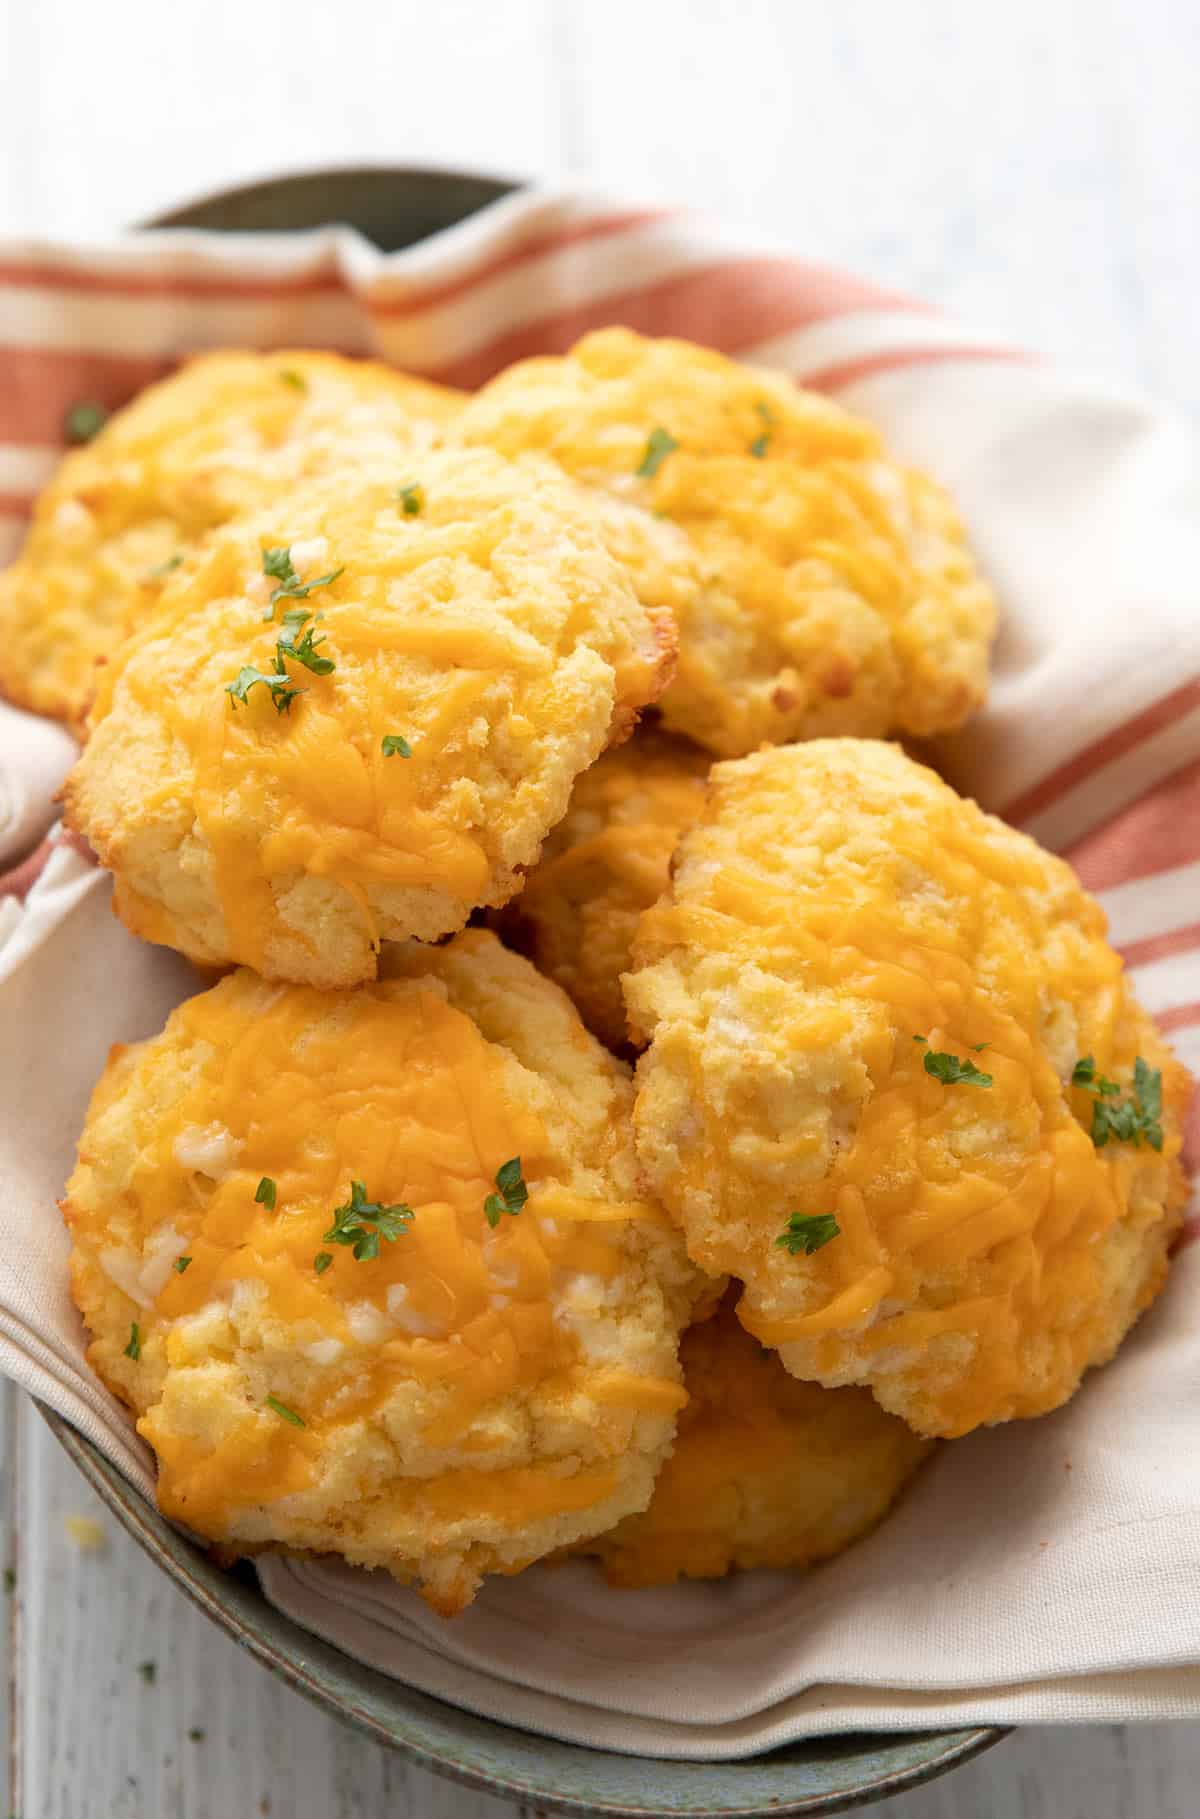 Easy keto biscuits piled in a bread basket over an orange striped napkin.